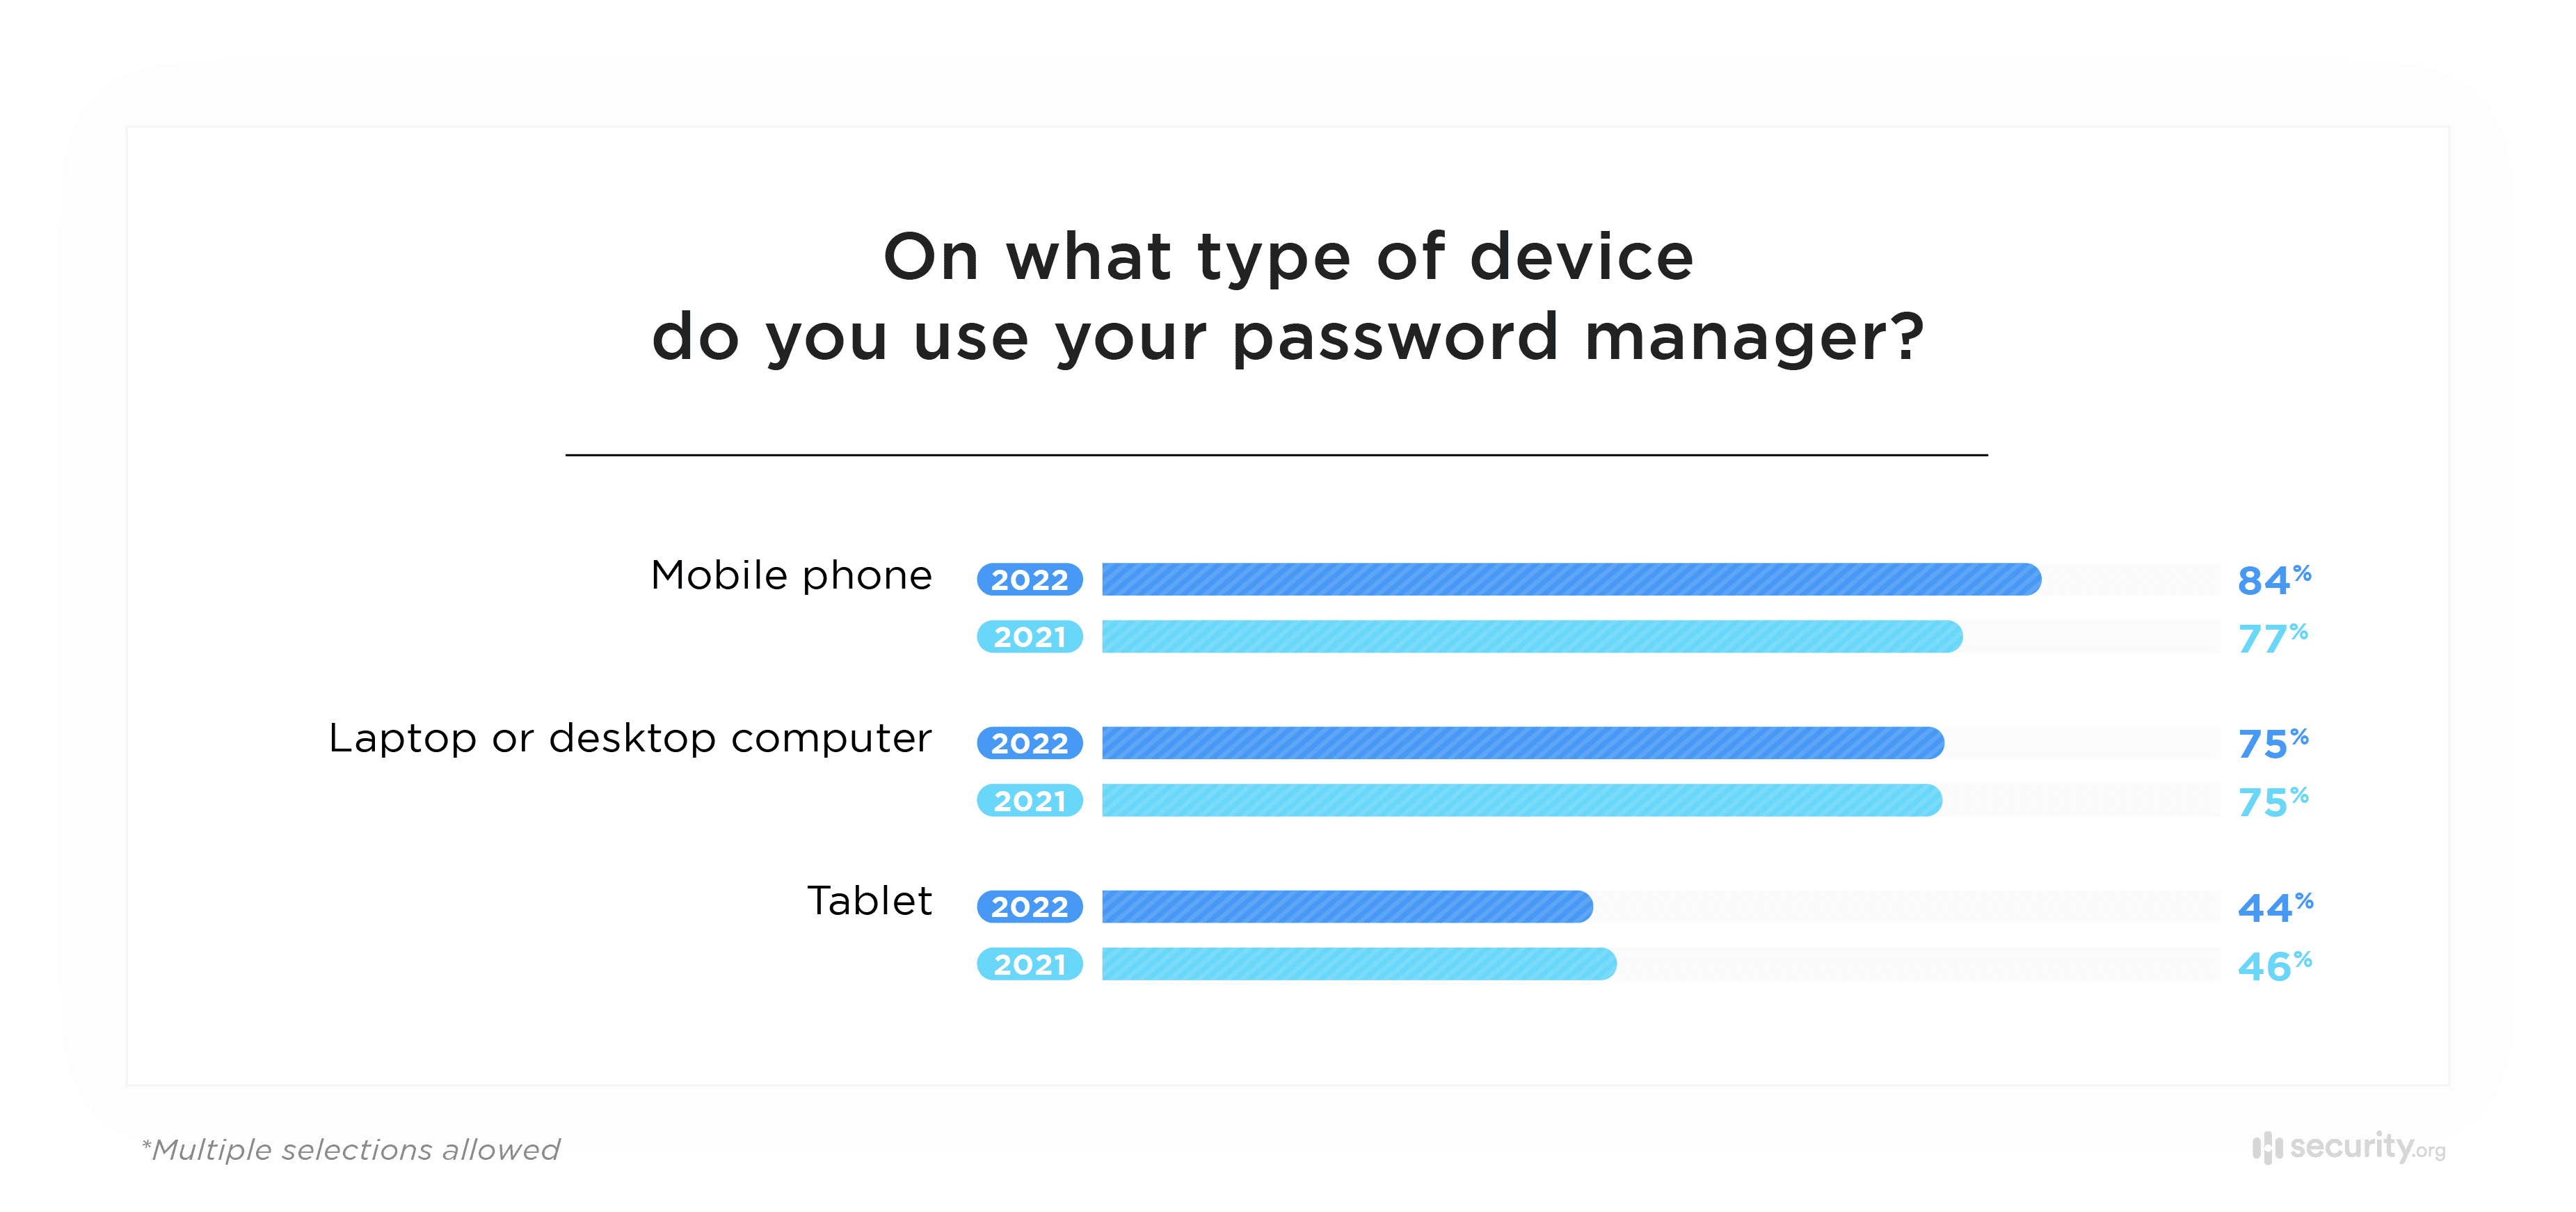 On what type of device do you use your password manager